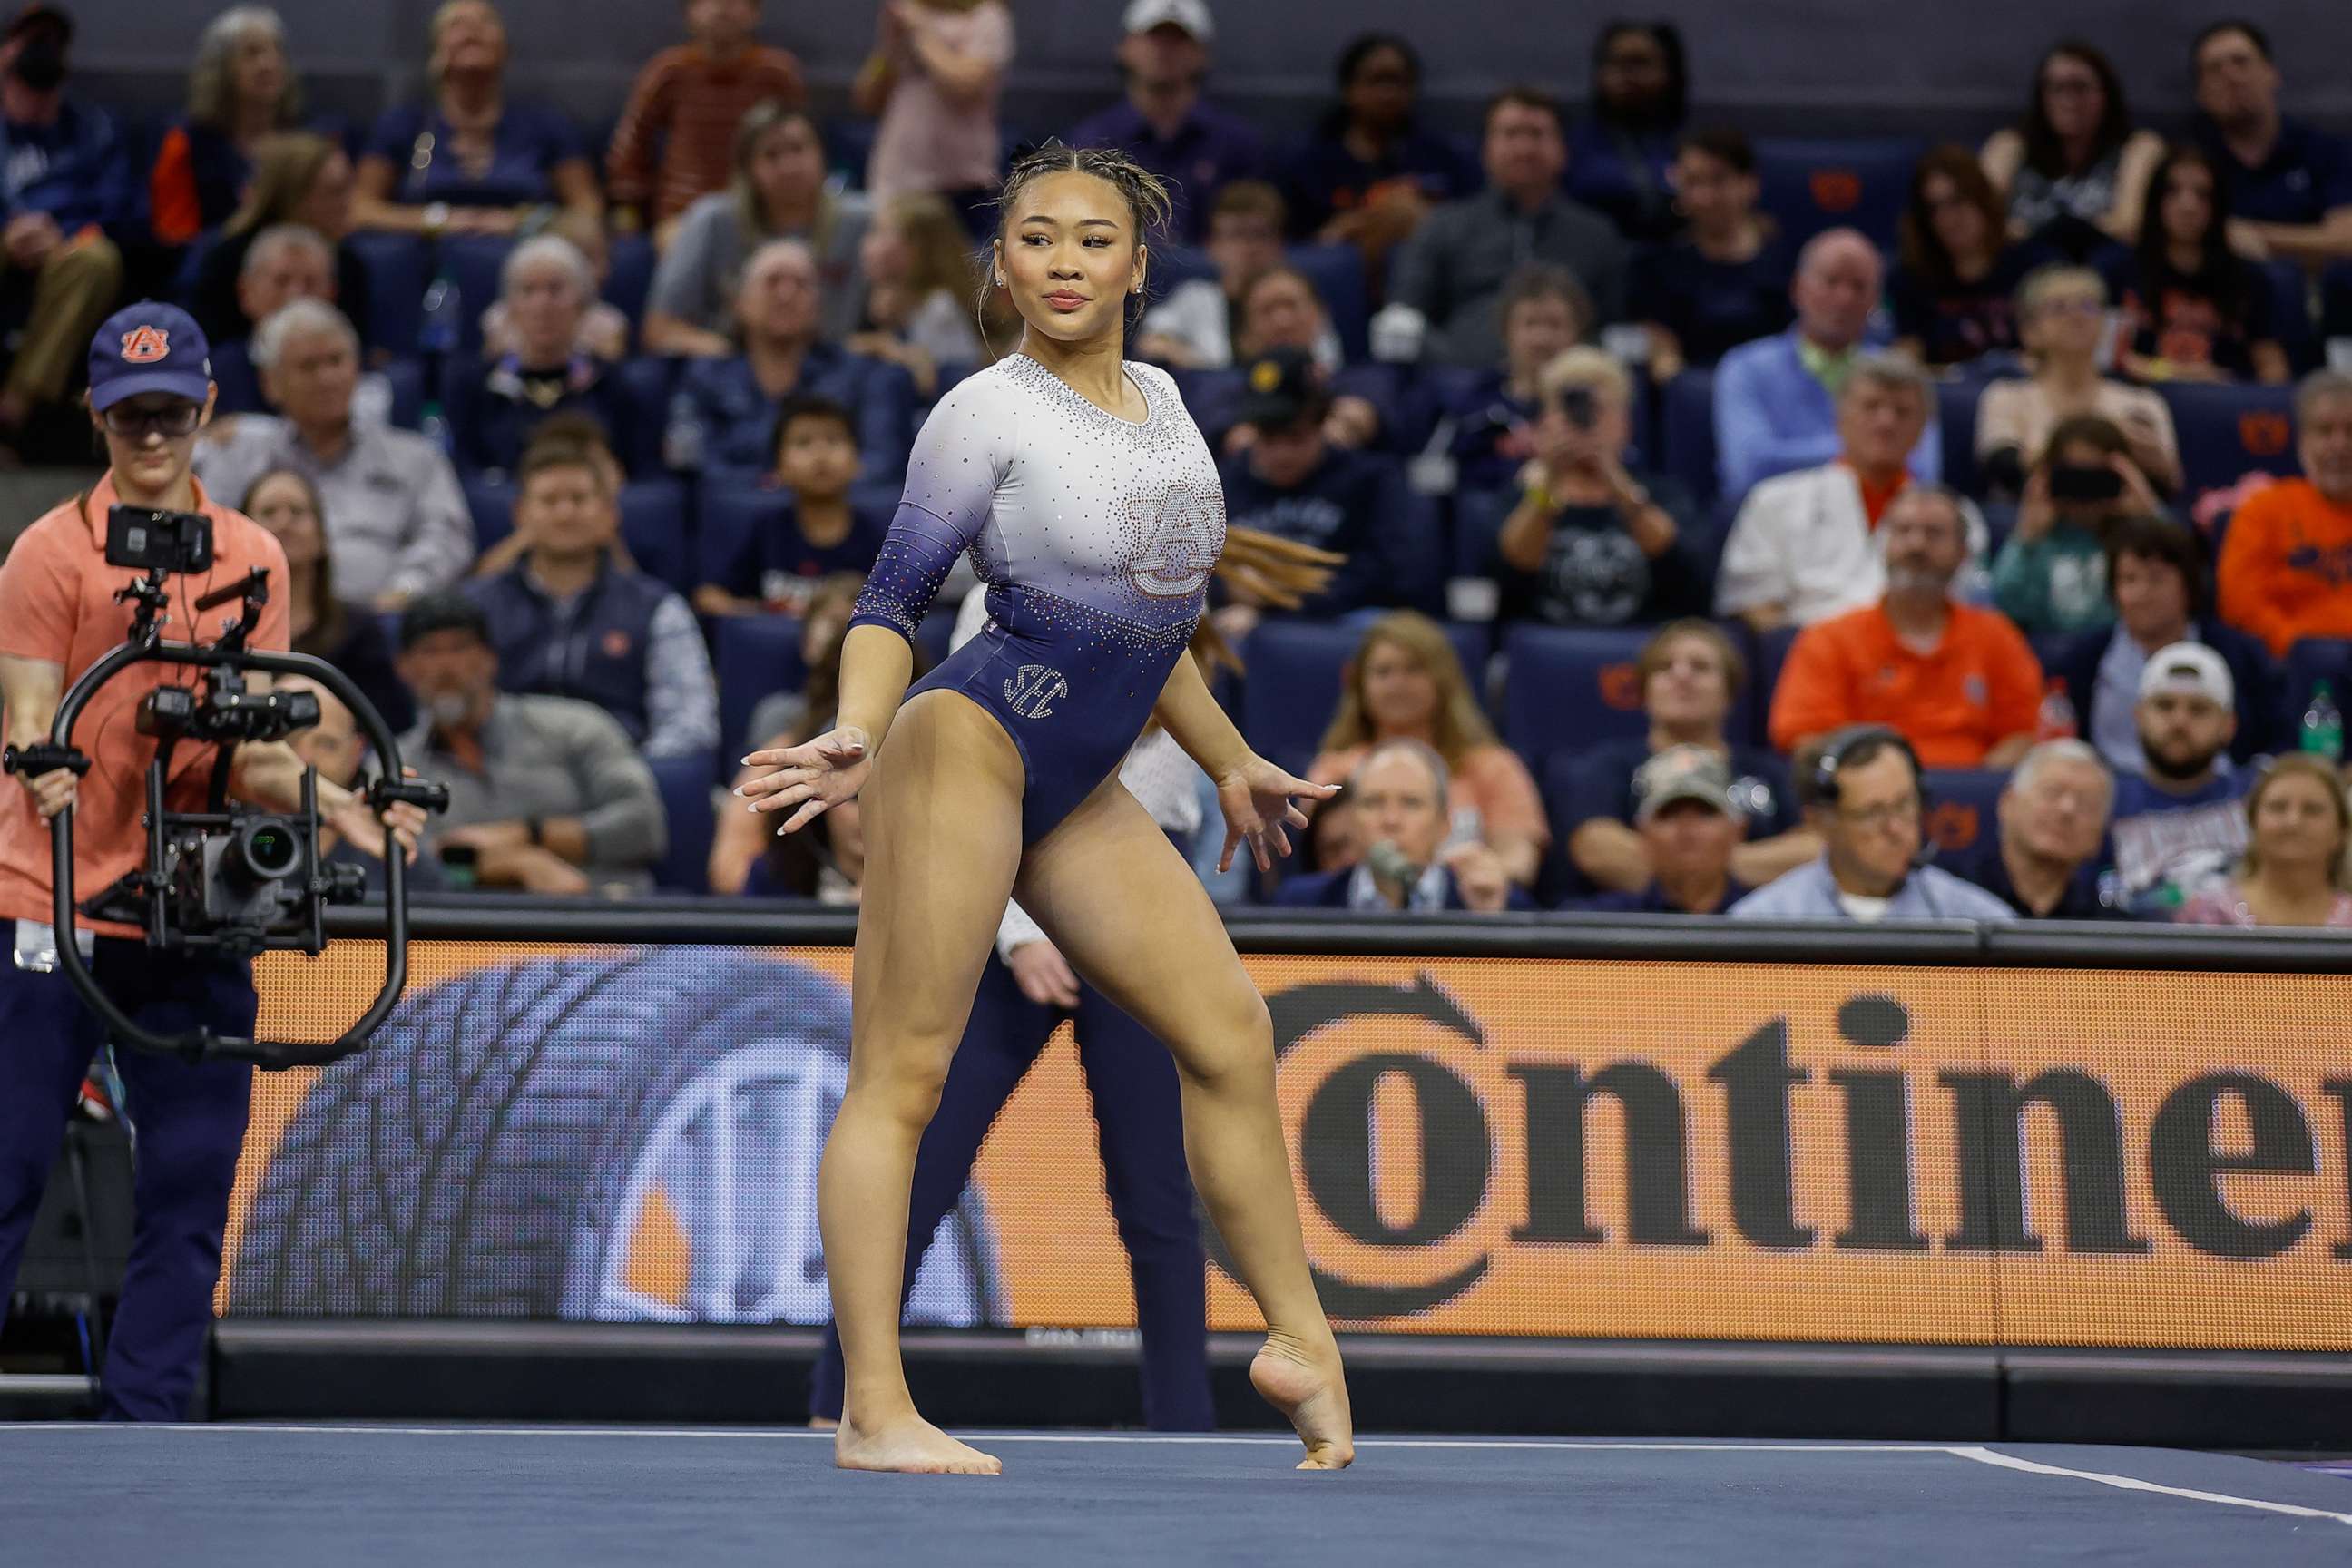 PHOTO: Sunisa Lee of Auburn competes on the floor during a meet against Georgia at Neville Arena, Feb. 24, 2023, in Auburn, Ala.